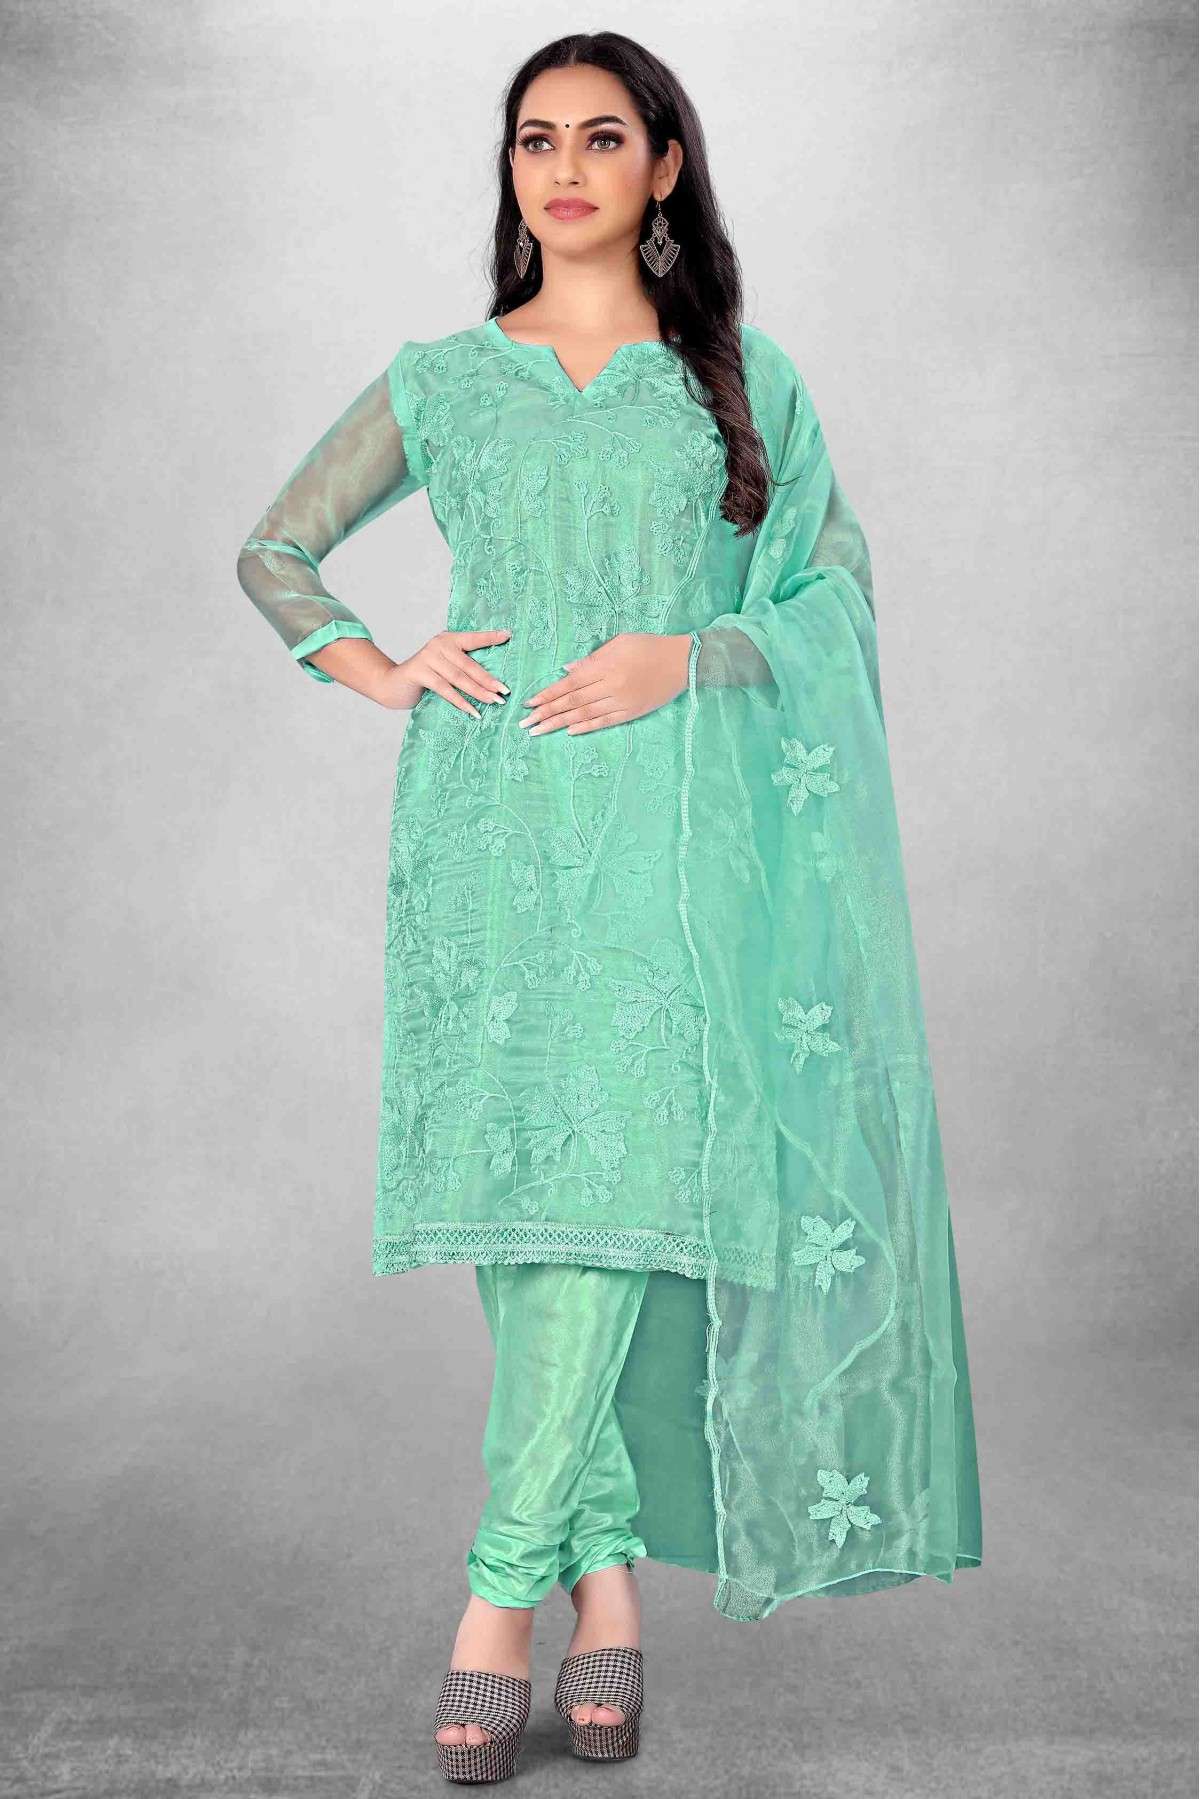 Unstitched Organza Embroidery Churidar Suit In Sea Green Colour - US3234444